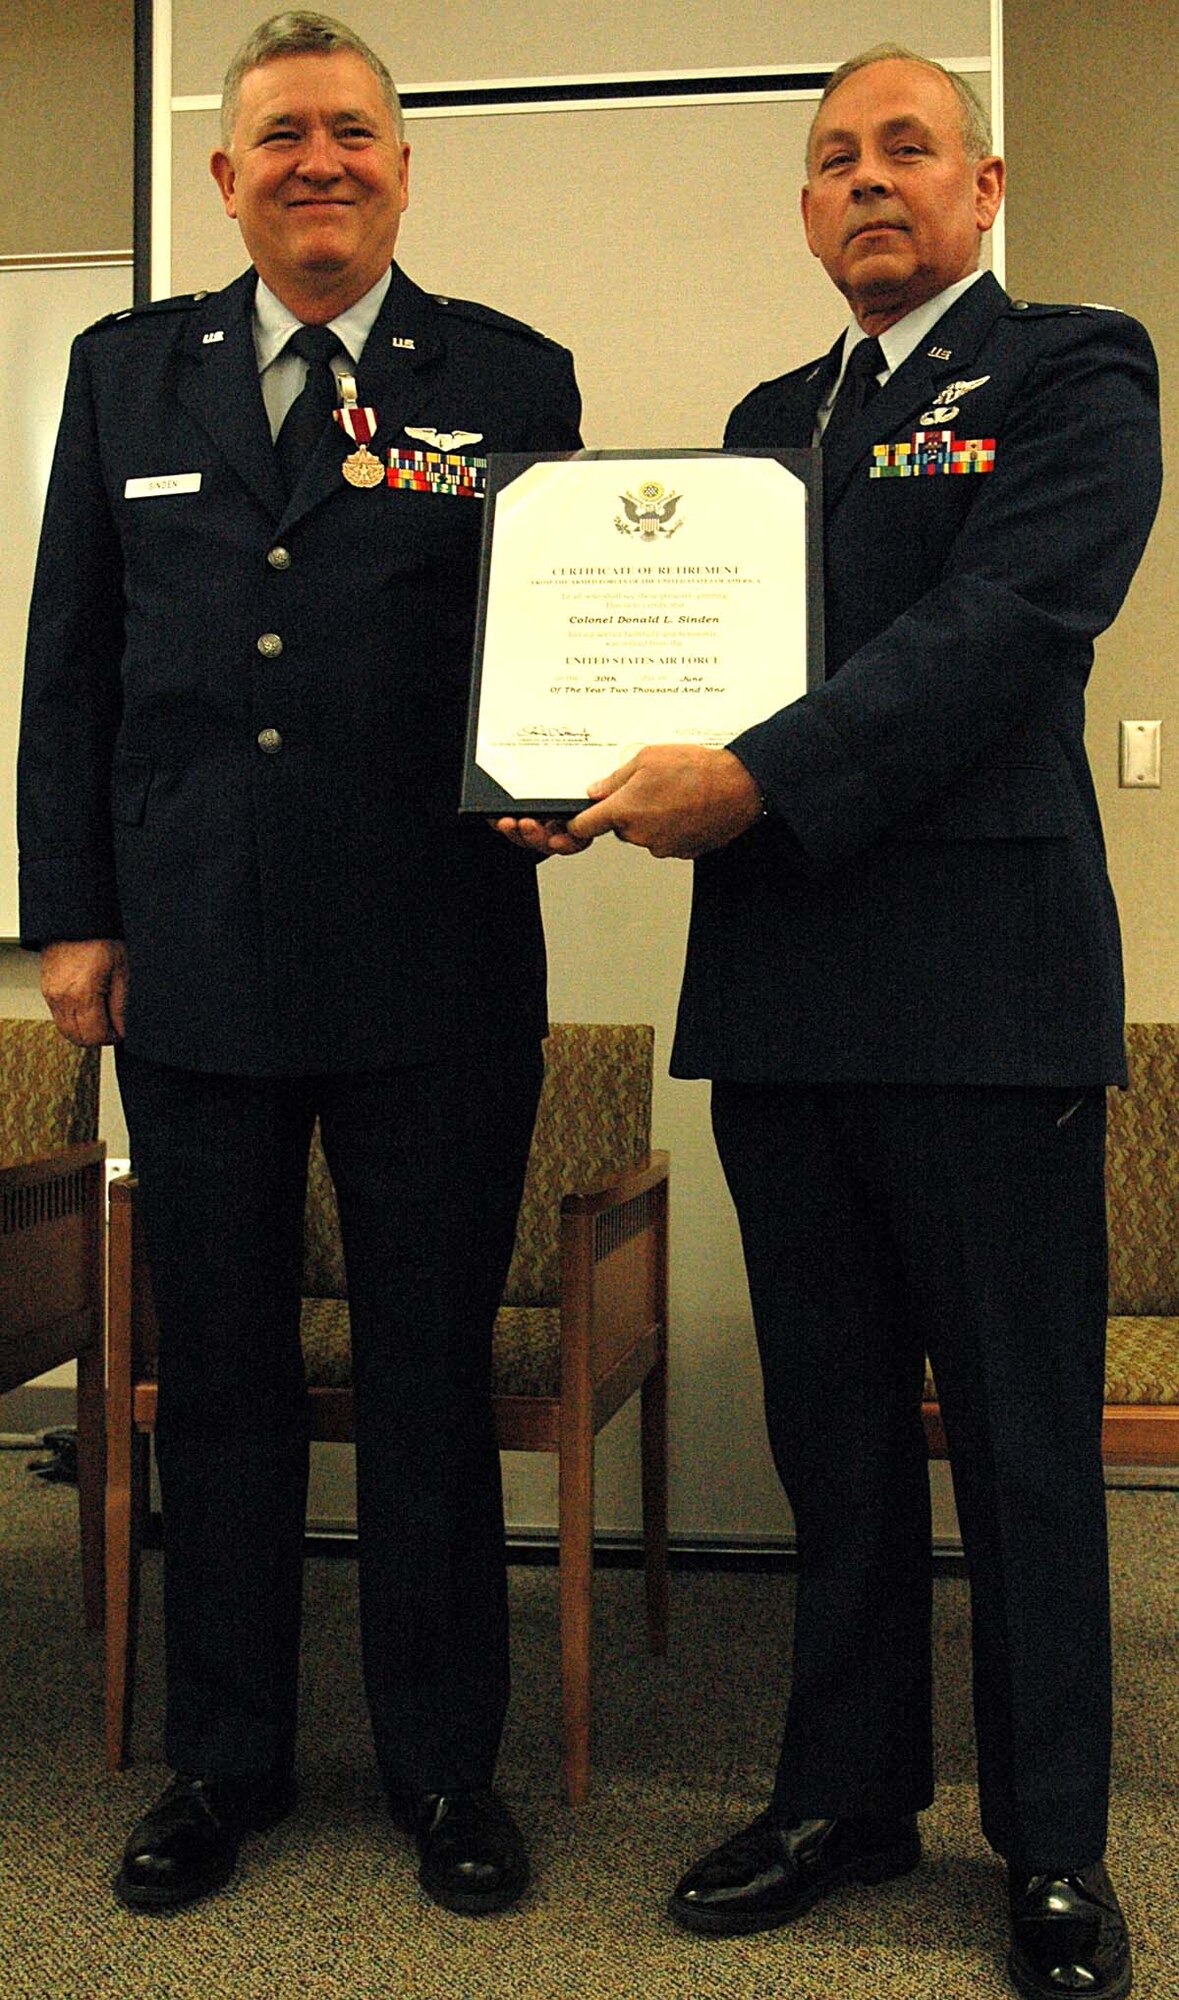 Col. Donald Sinden, left, 446th Aerospace Medicine Squadron, is presented with his certificate of retirement by Col. Michael Jones, 446th Airlift Wing special assistant to the commander.  Colonel Sinden gave 24 years of service to his country and the Air Force.  (Air Force photo/Senior Airman Patrick Cabellon)